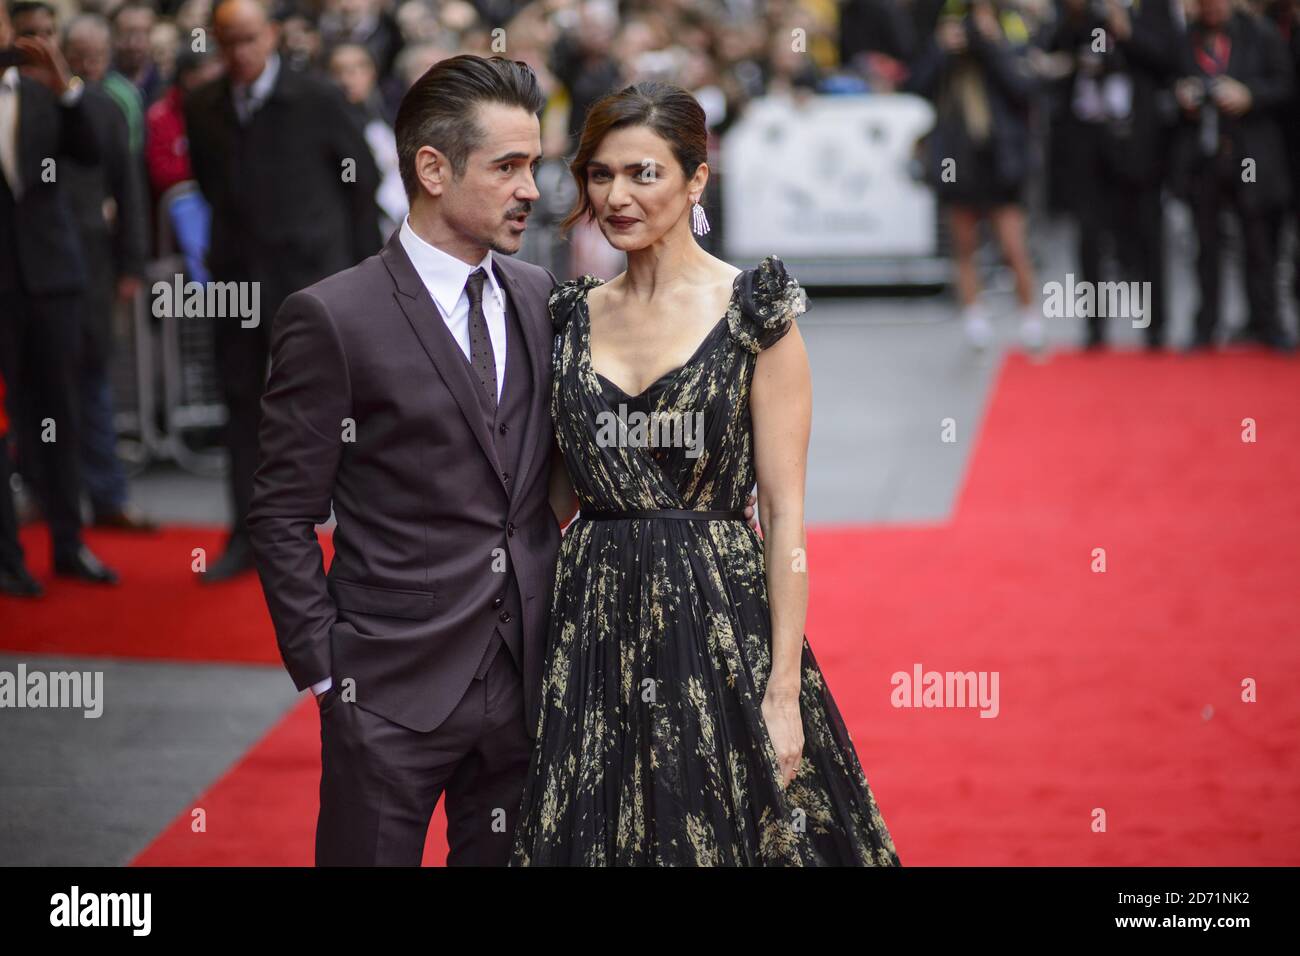 Colin Farrell and Rachel Weisz attending the official screening of The Lobster during the 59th BFI London Film Festival at Vue West End, Leicester Square, London.  Stock Photo